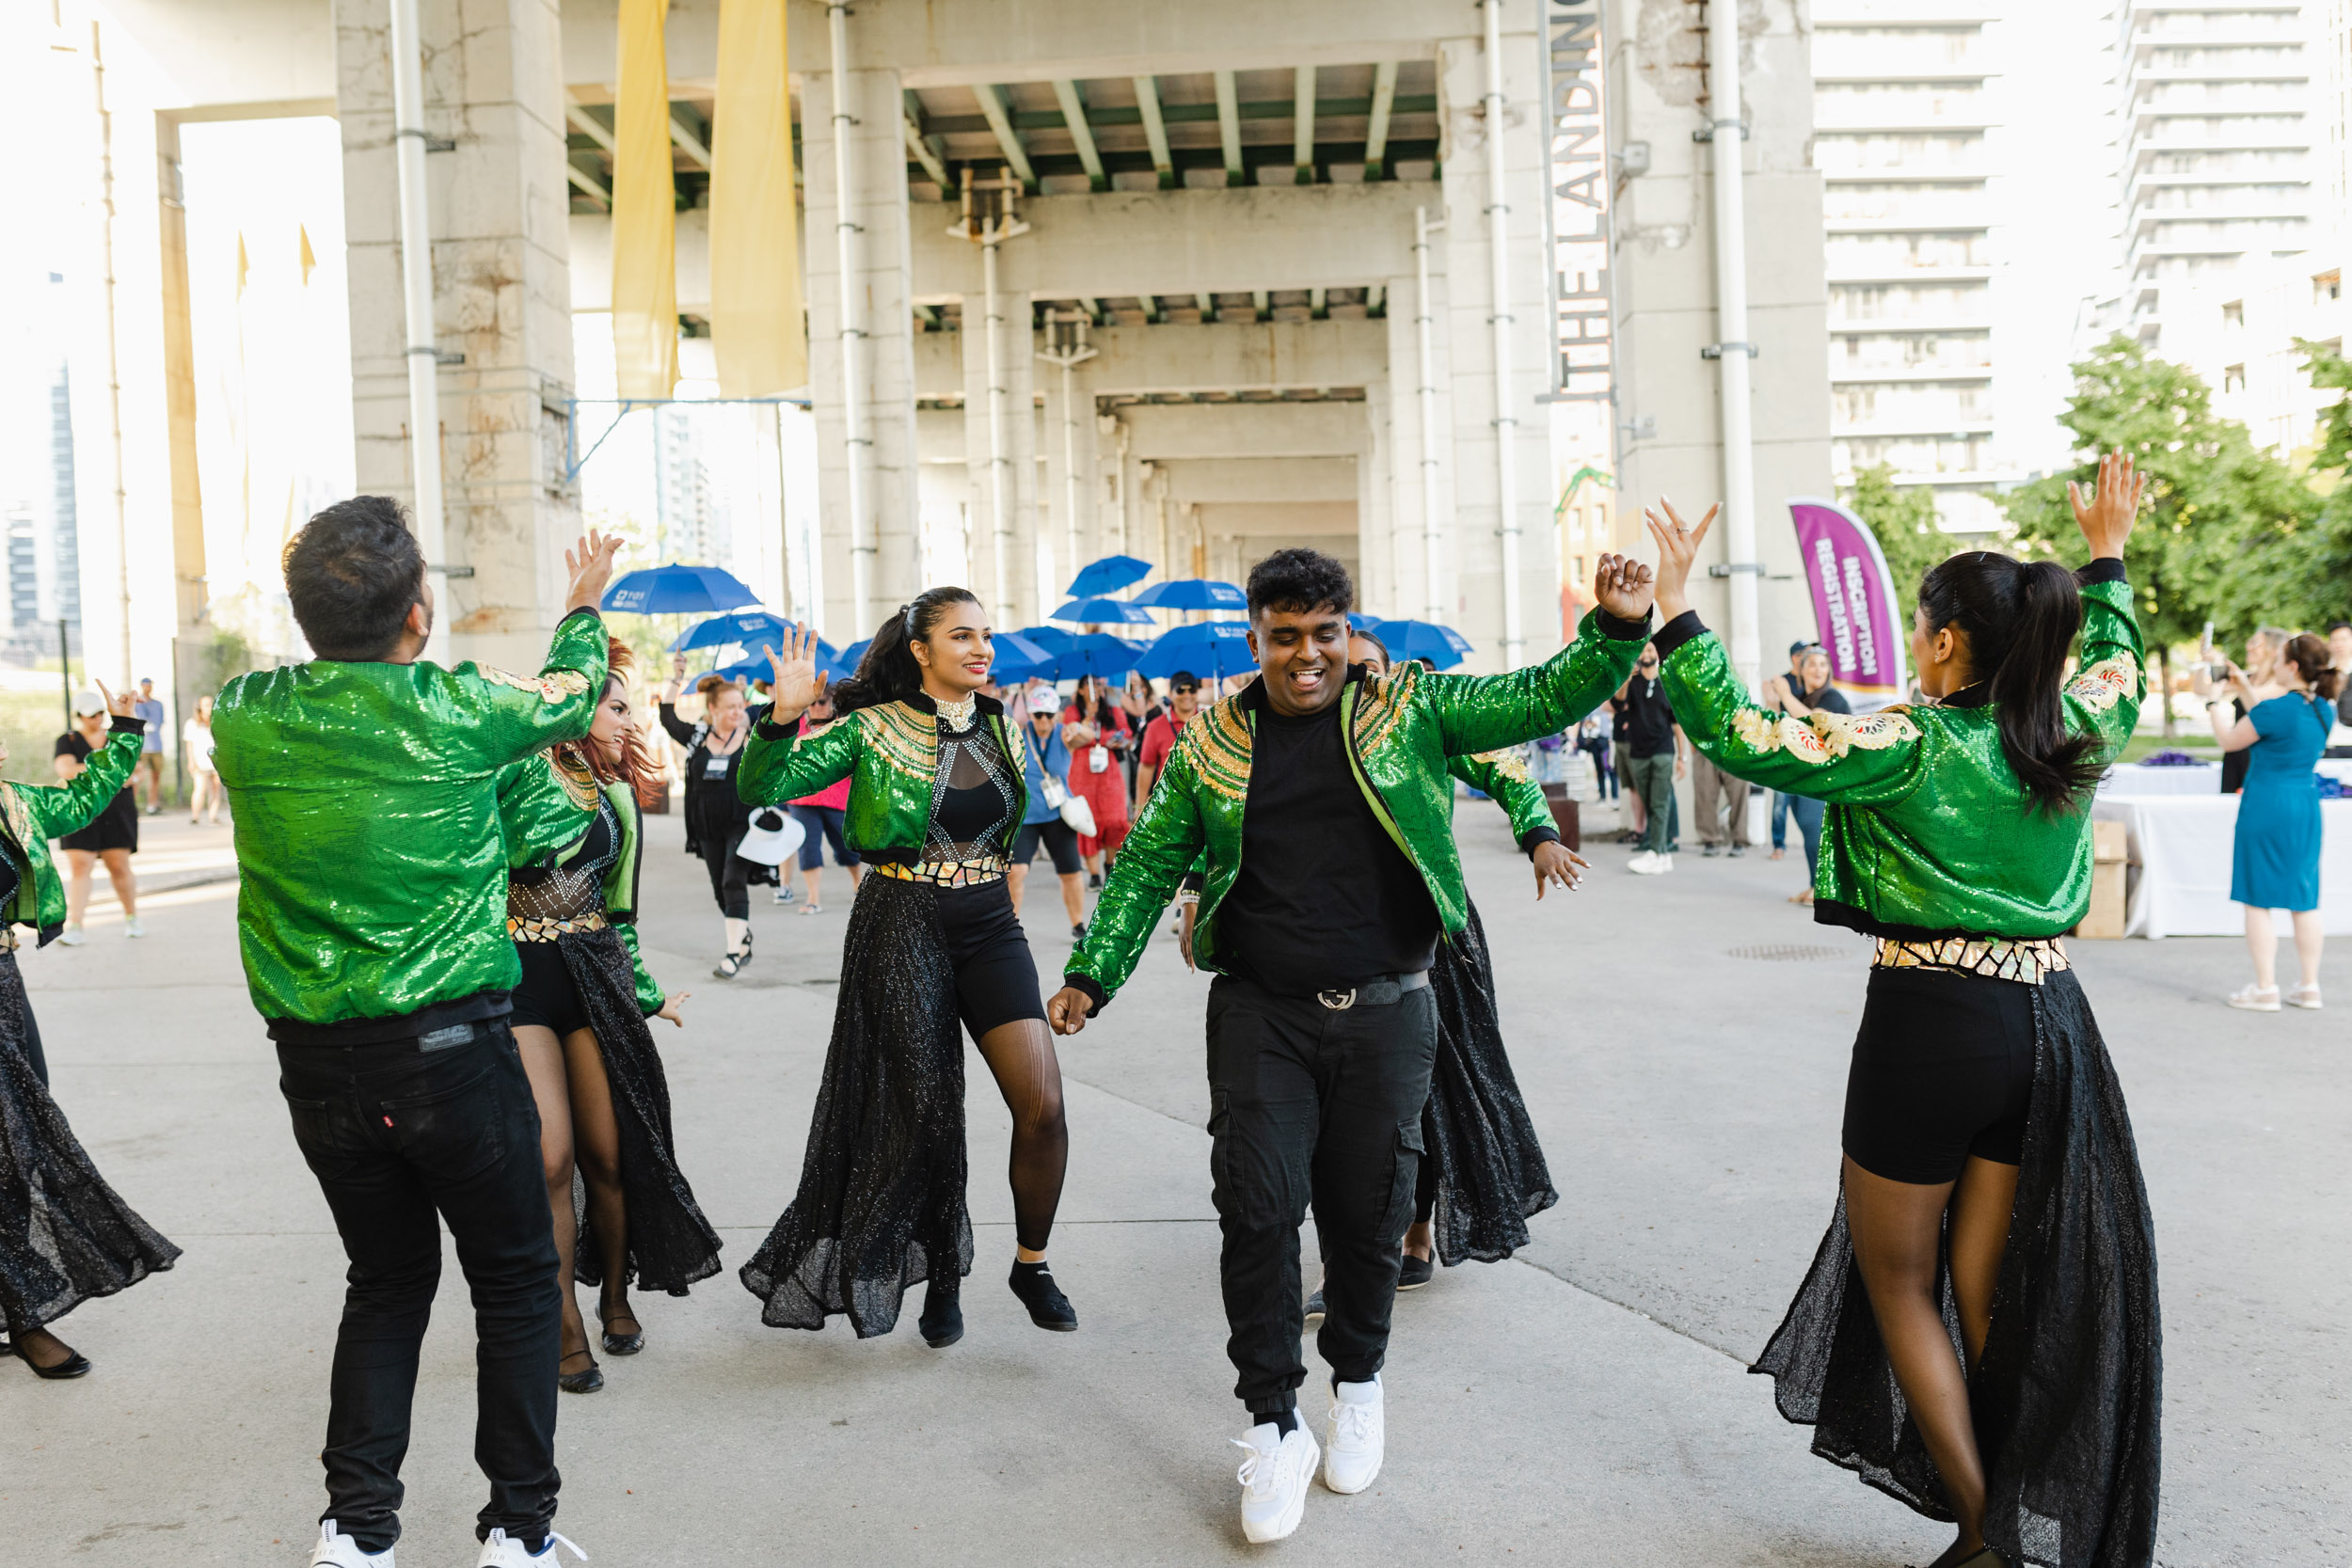 Conference photography: A troupe of dancers in green jackets performing on a bridge.